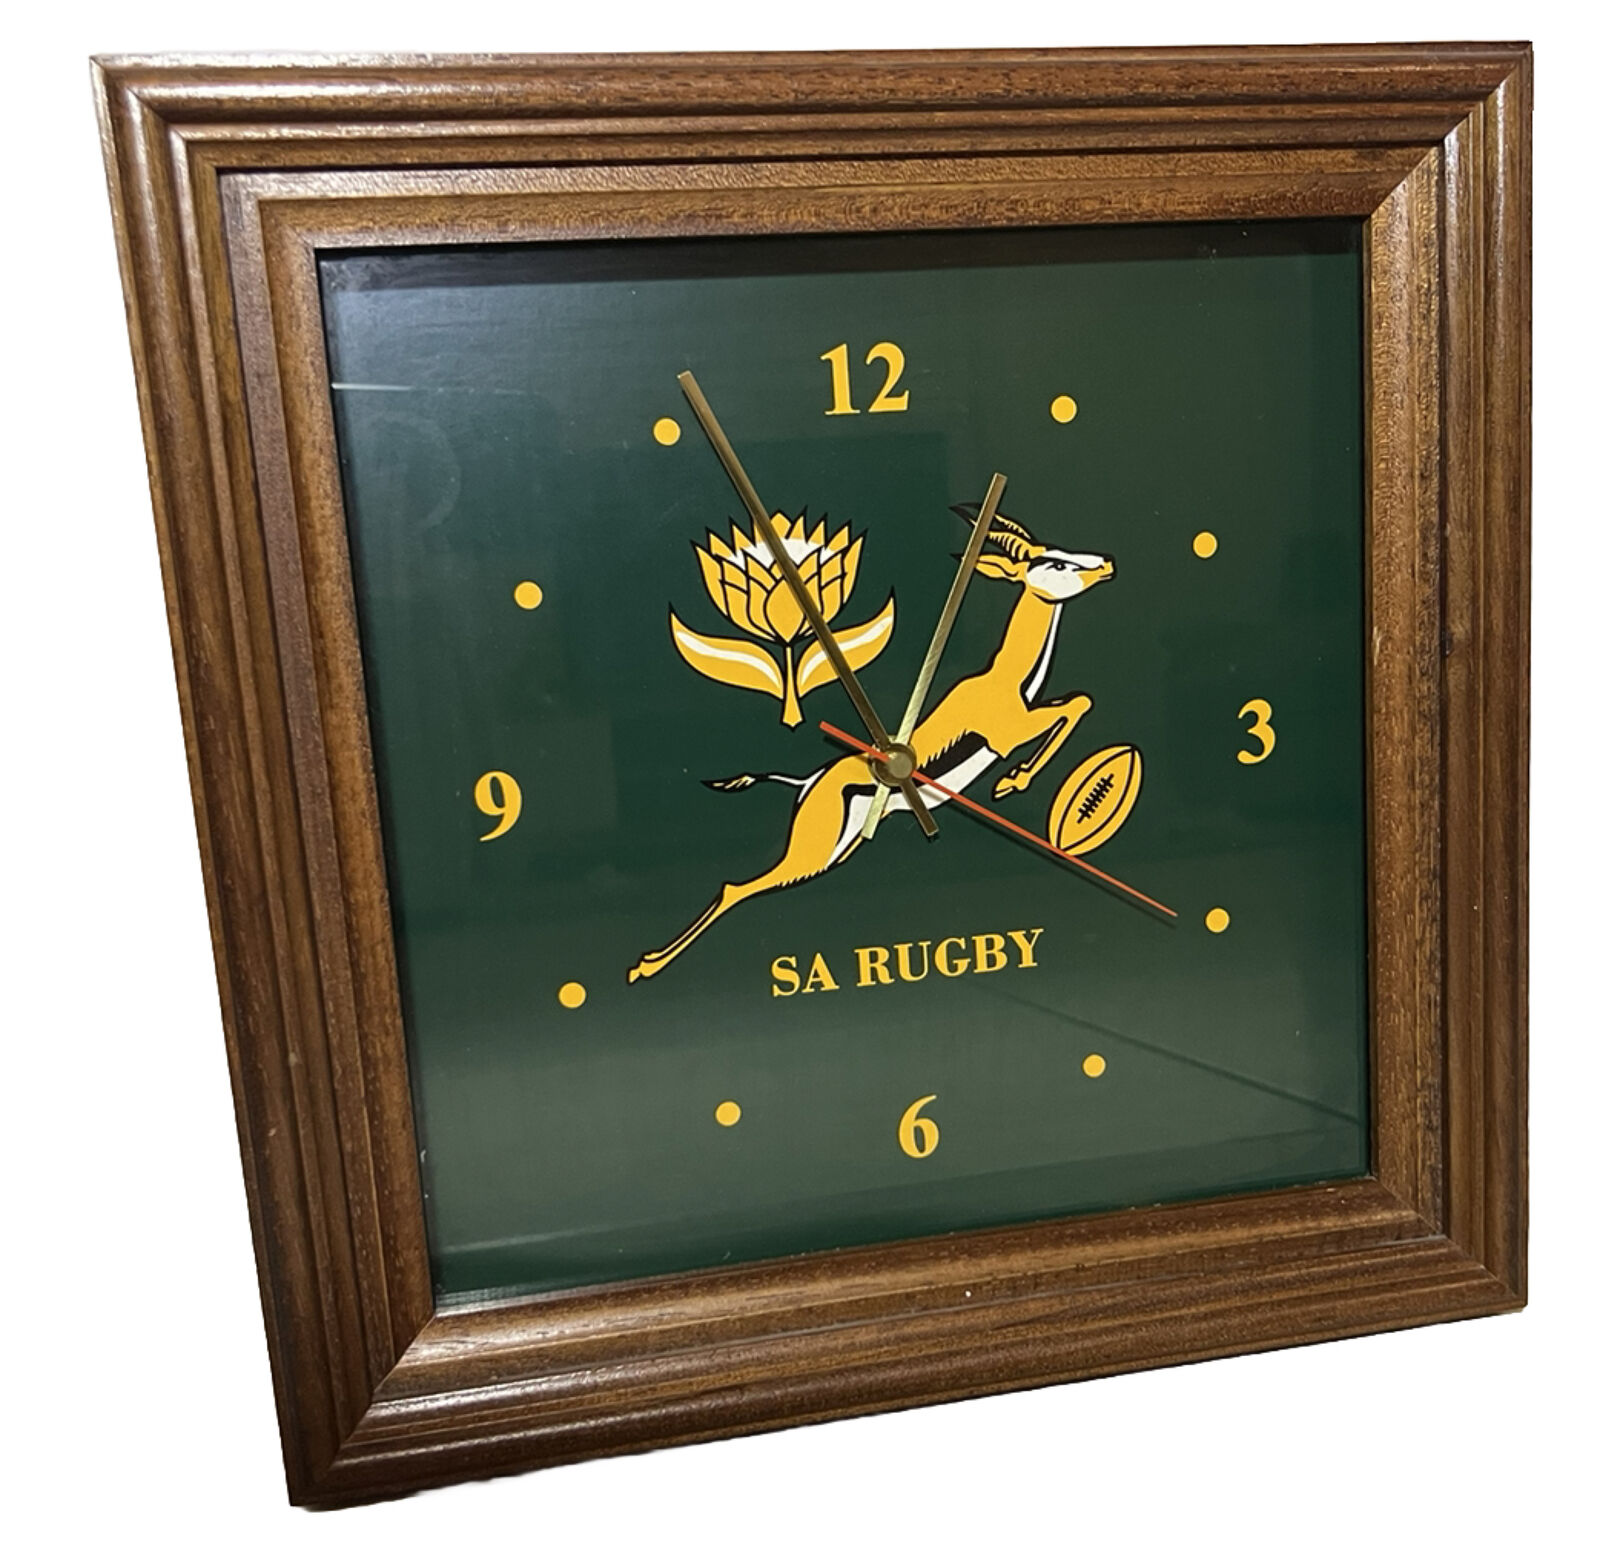 Springboks South Africa Rugby Wall Clock Wooden Analog SA Rugby Union